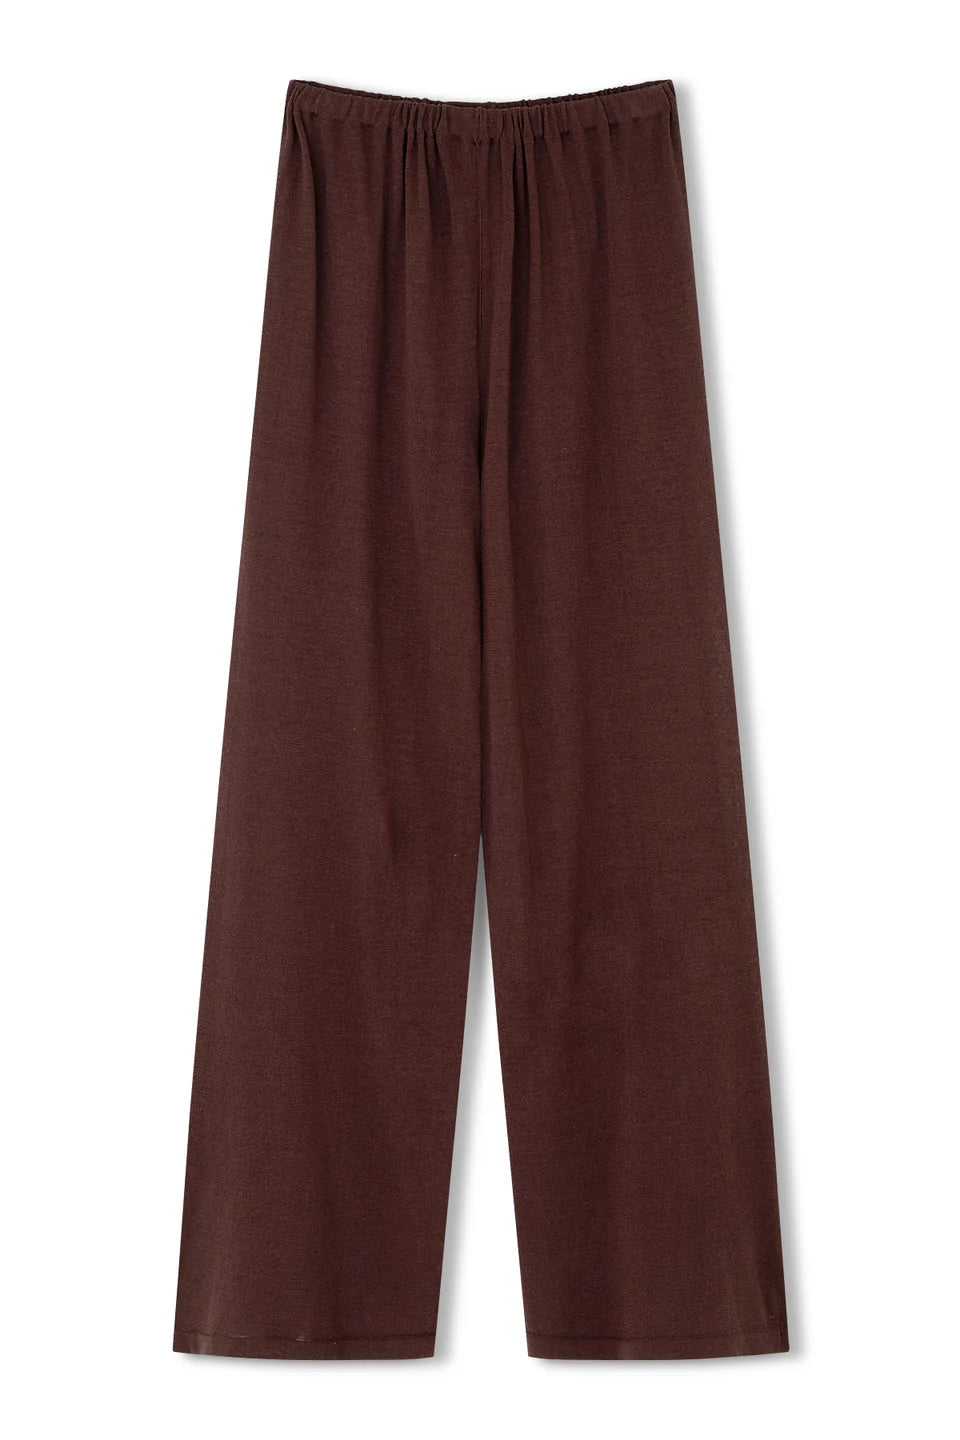 CURRANT RELAXED KNIT PANT